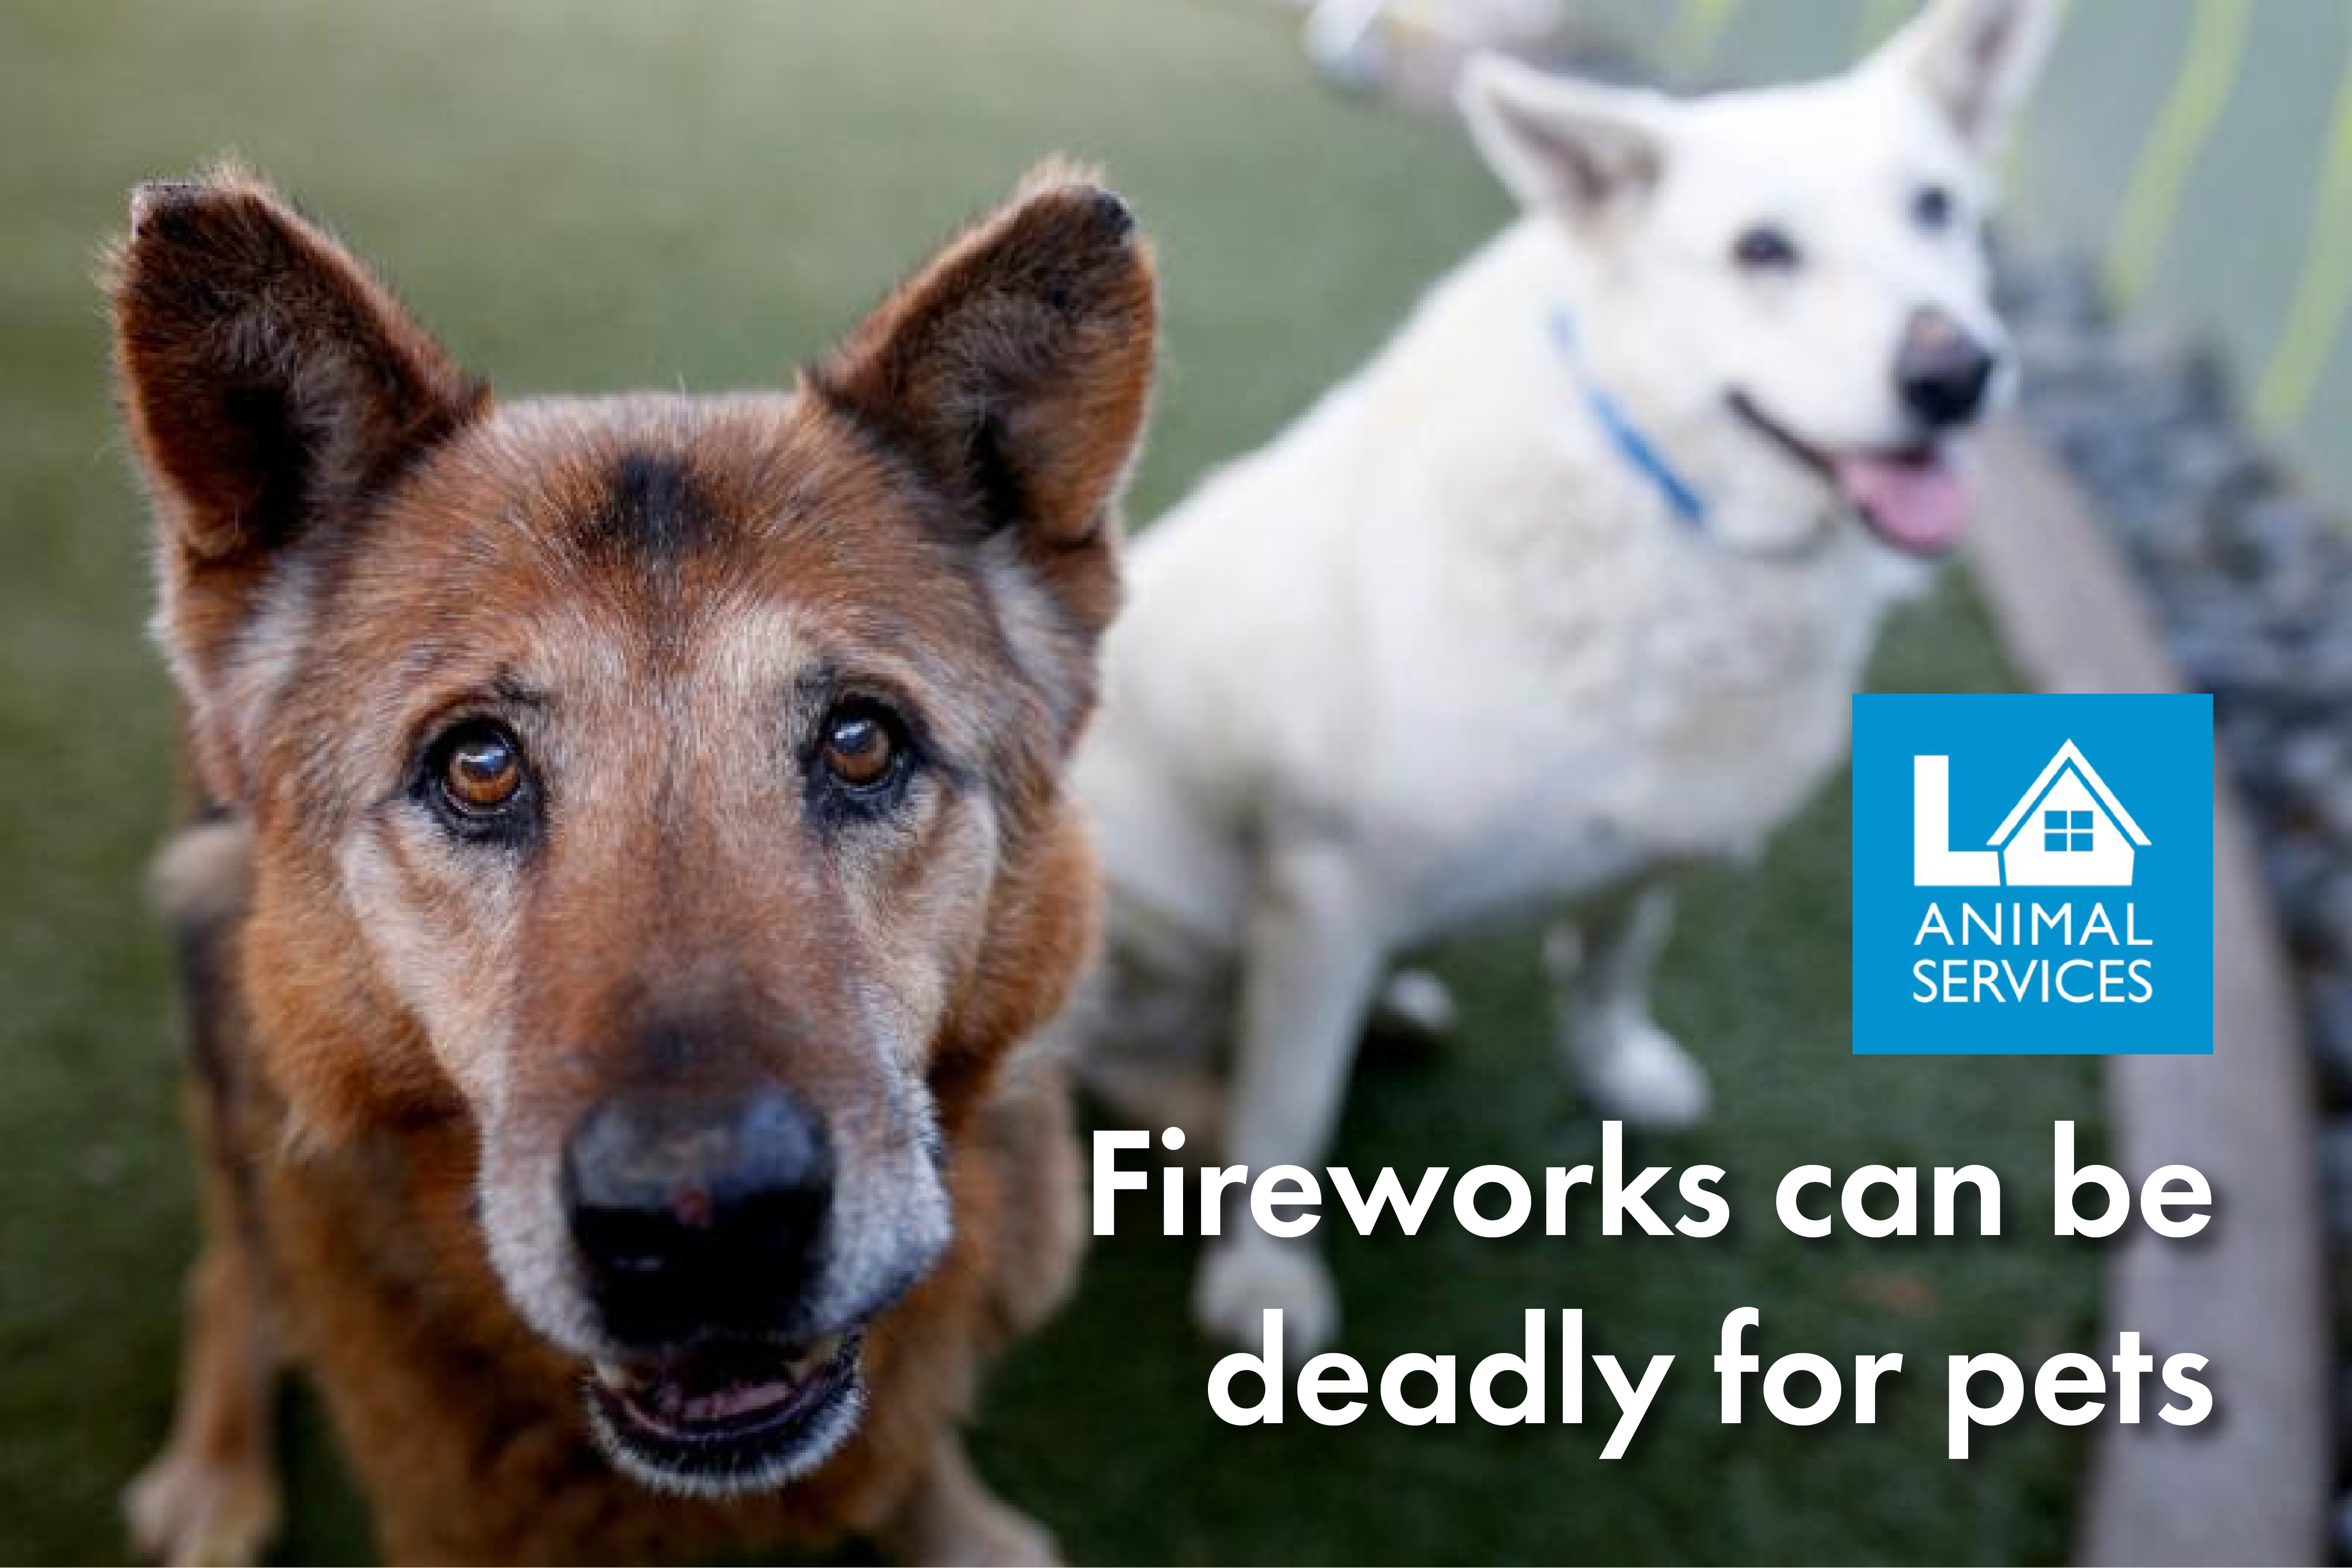 Fireworks can be deadly for pets